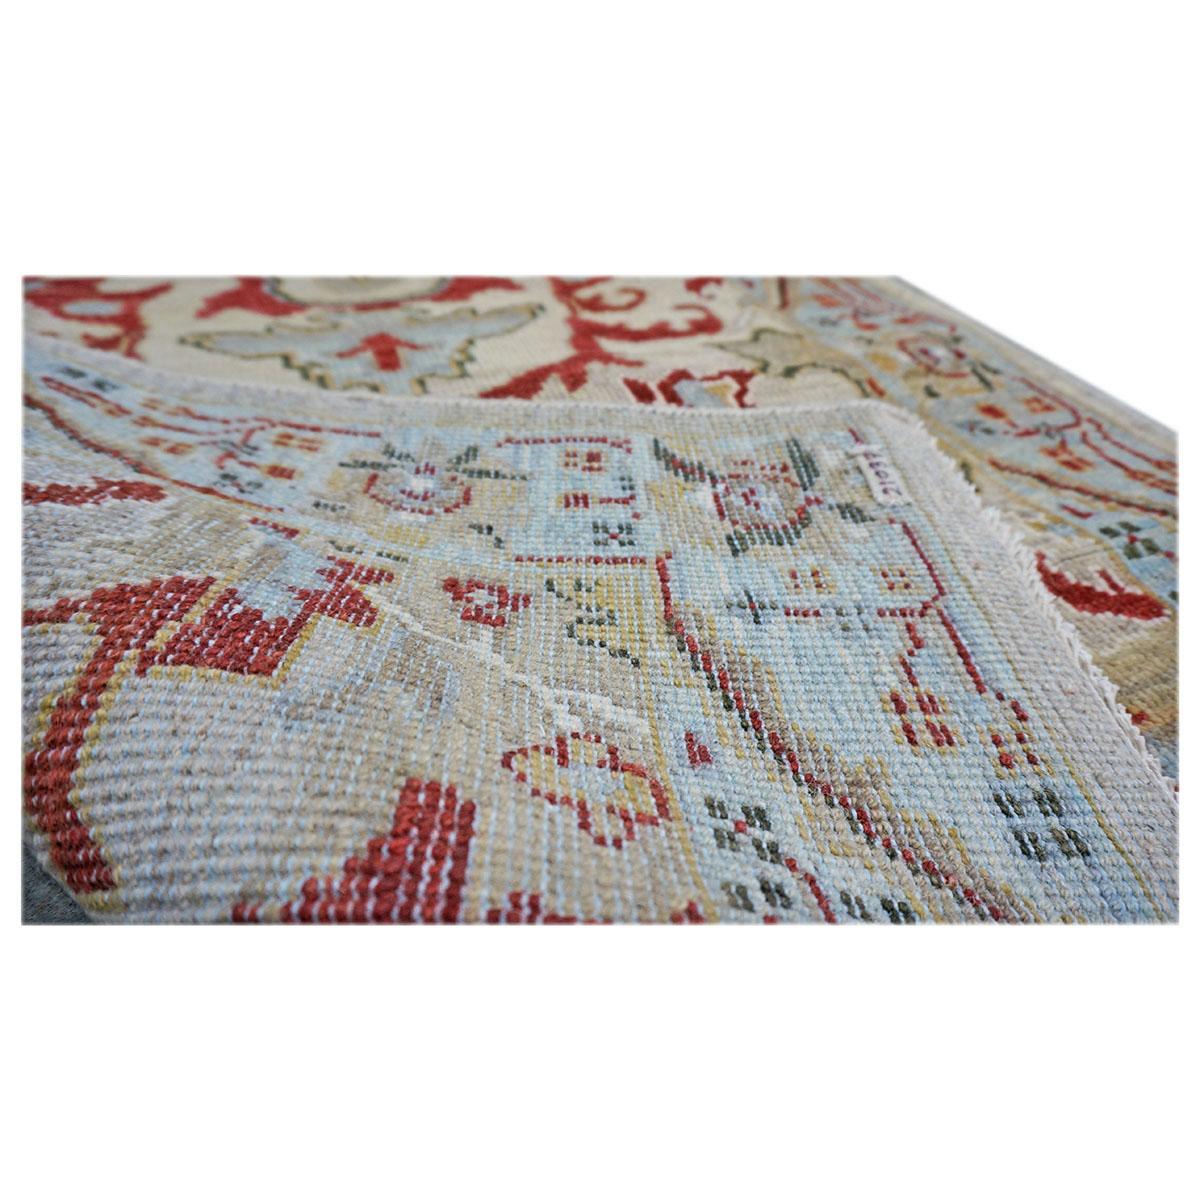 21st Century  Sultanabad 3x10 Tan, Red & Light Blue Handmade Hall Runner In Excellent Condition For Sale In Houston, TX